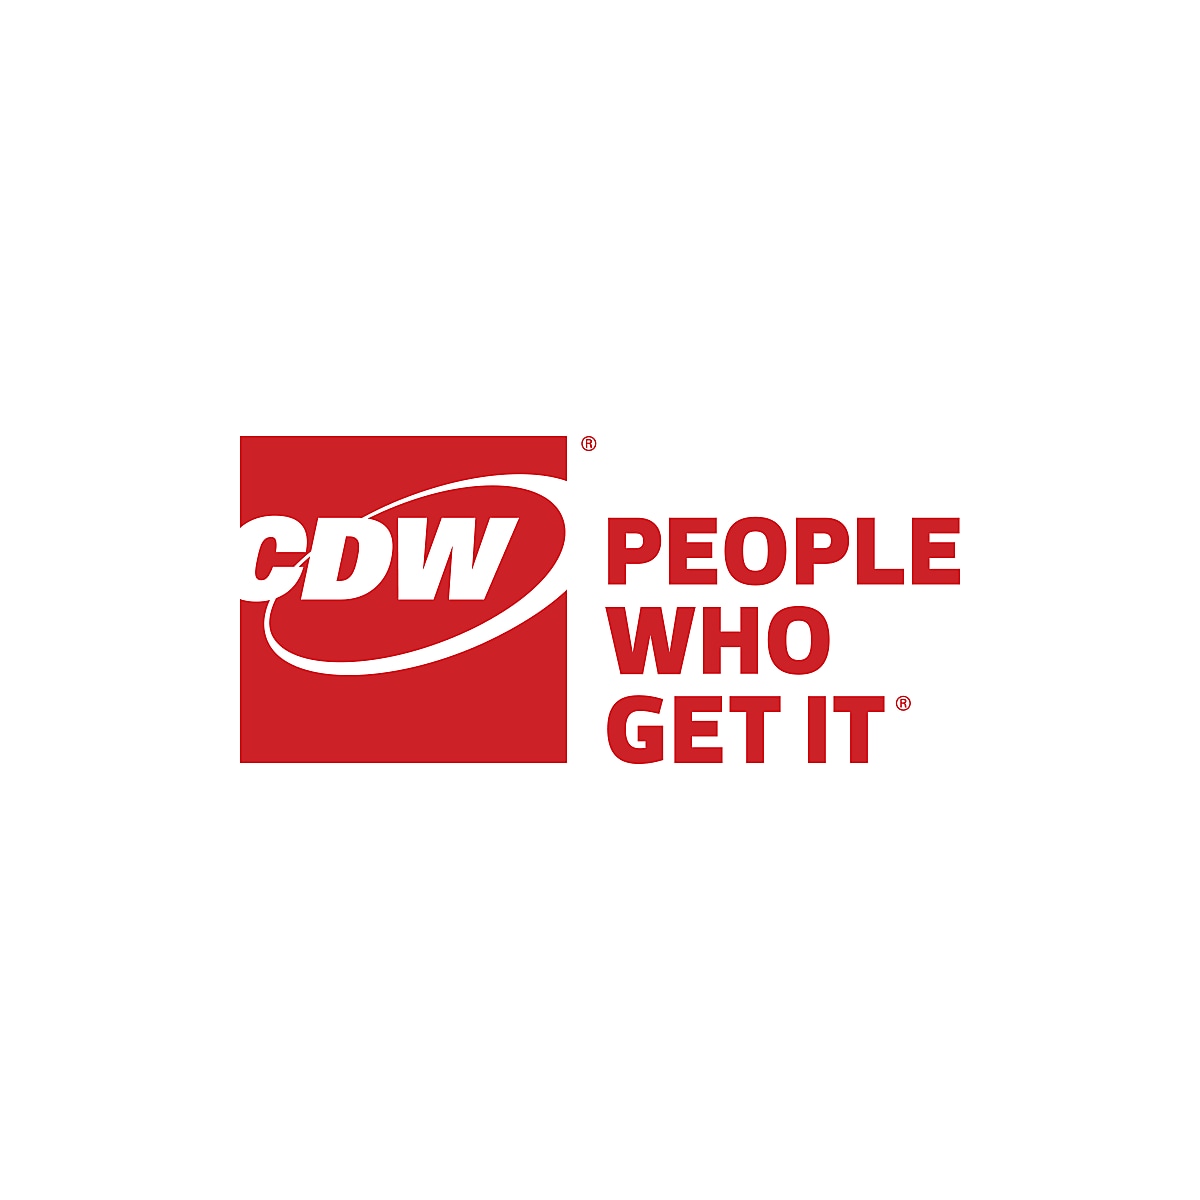 Sign In to My CDW Account